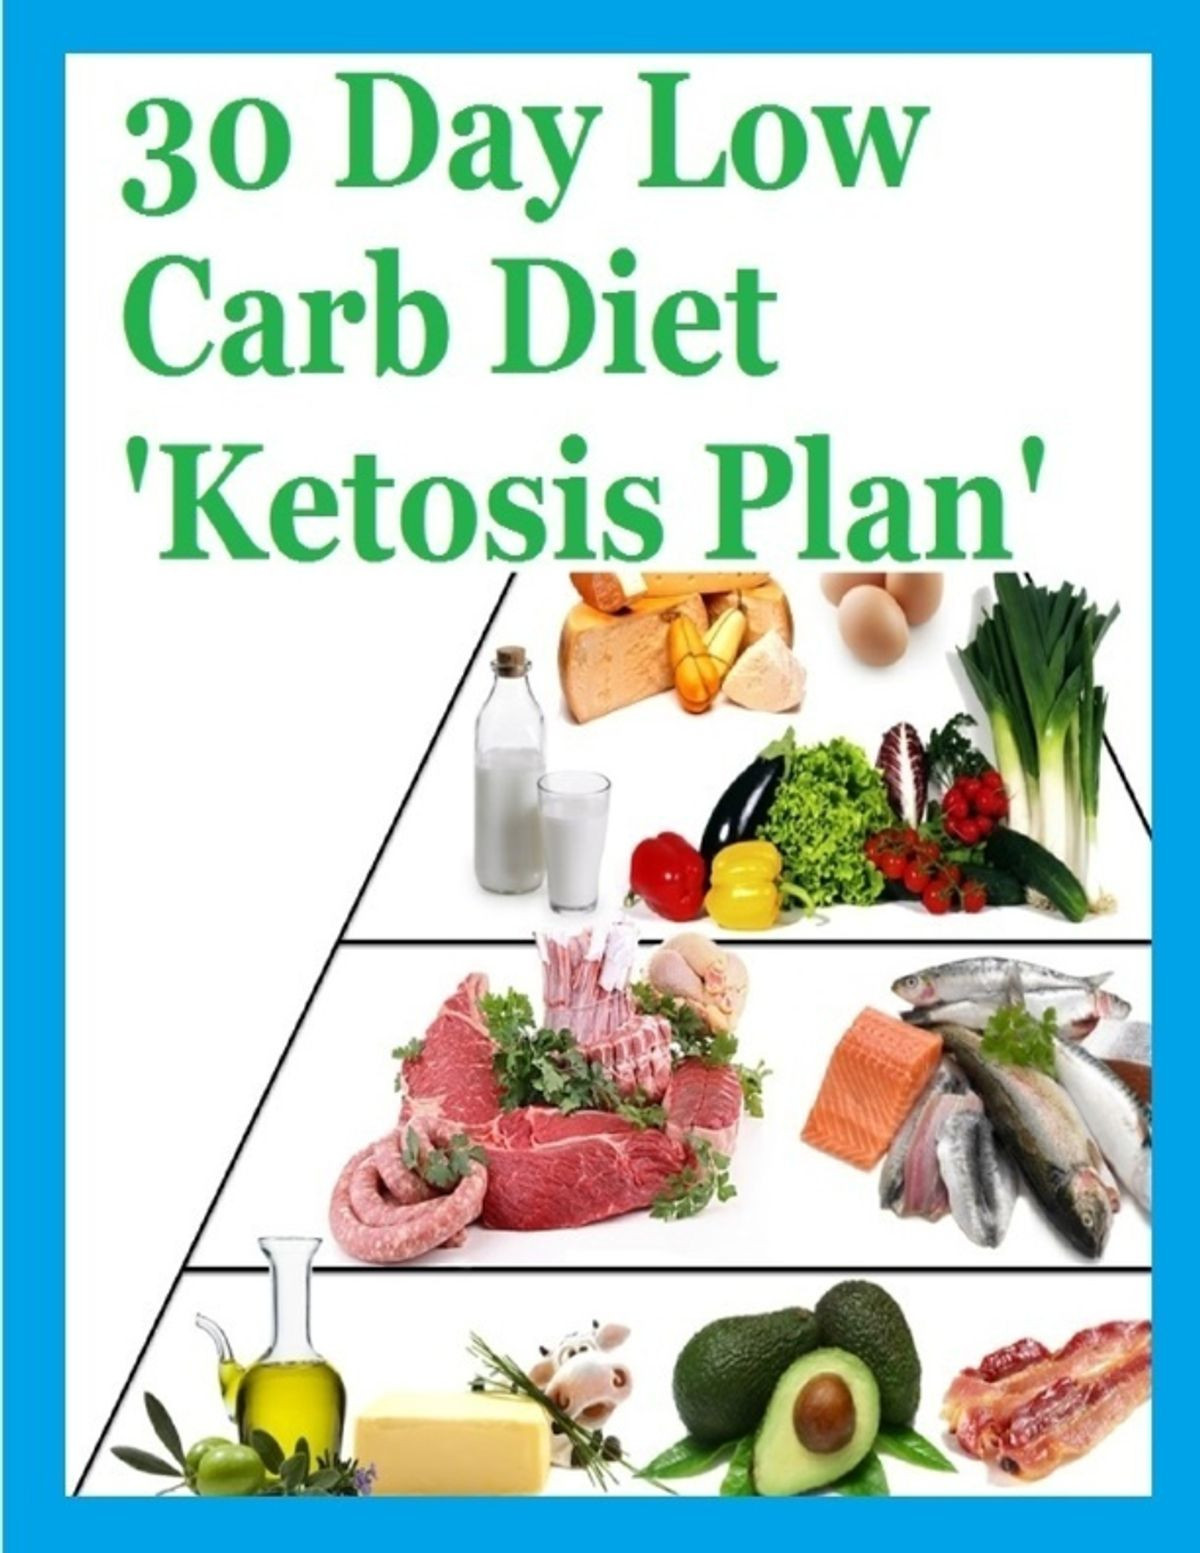 Low Carbohydrate Diet
 30 Day Low Carb Diet ‘Ketosis Plan’ eBook by Eric Spencer